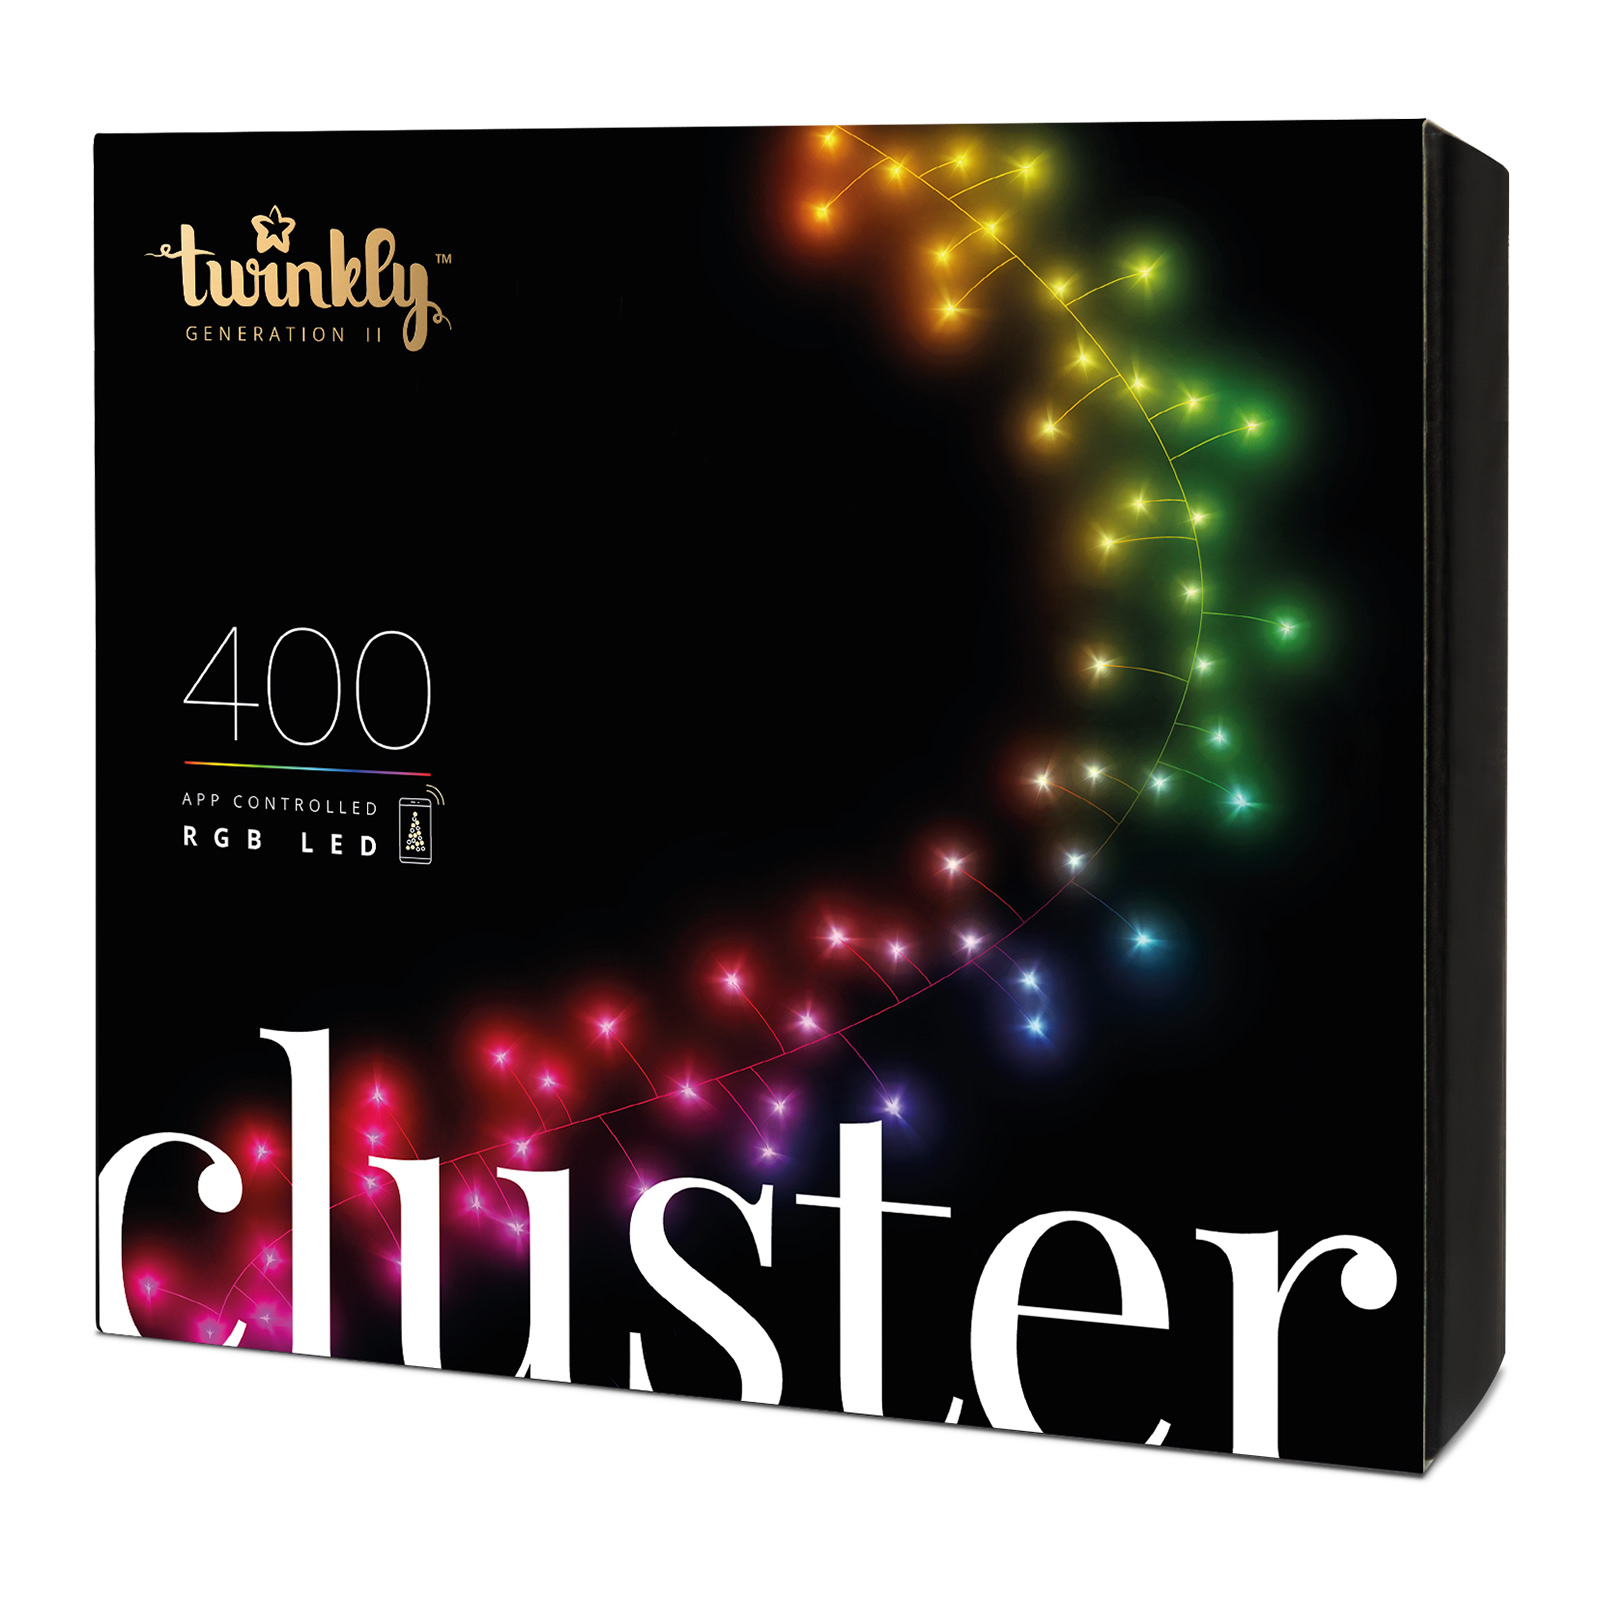 Catena cluster Twinkly RGB, nero, 400 luci 6m